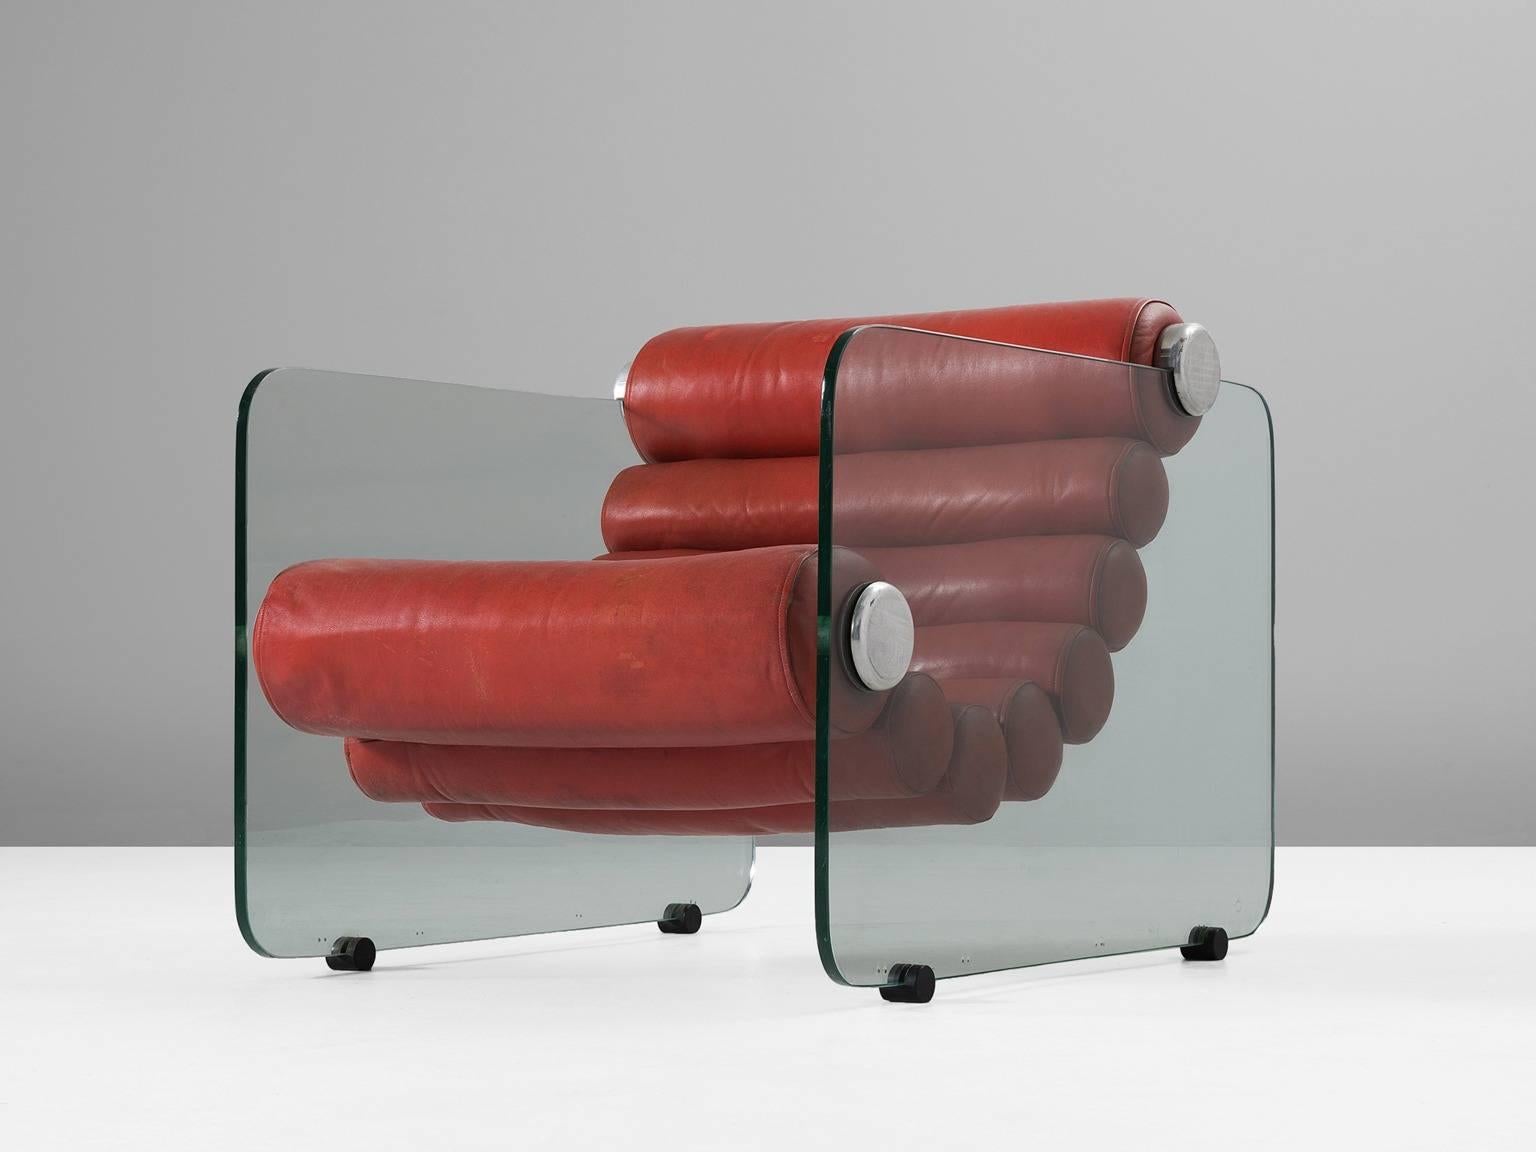 Lounge chair 'Hyaline', in glass, metal and red leather, by Fabio Lenci for Comfort Line, Italy, 1967.

Characteristic lounge chair by Italian designer Fabio Lenci. Lenci is known for his designs with leather seating flanked by glass panels. The